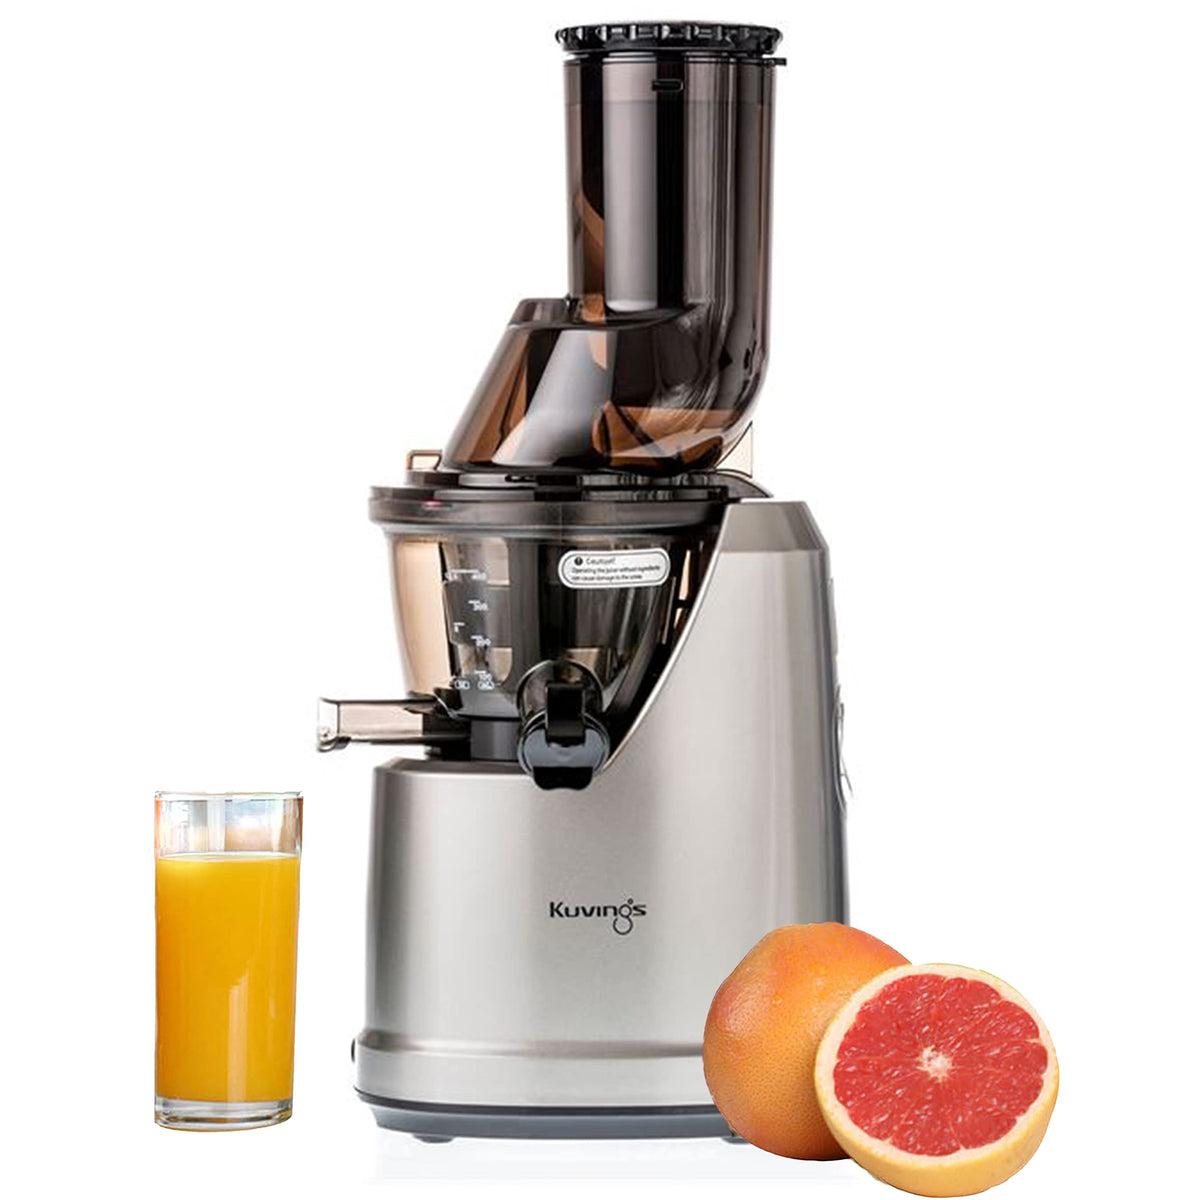 Kuvings B1700 Dark Silver Professional Cold Press Whole Slow Juicer with Smoothie & Sorbet Attachments Included 12 Years Warranty All-in-1 Fruit & Vegetable Juicer